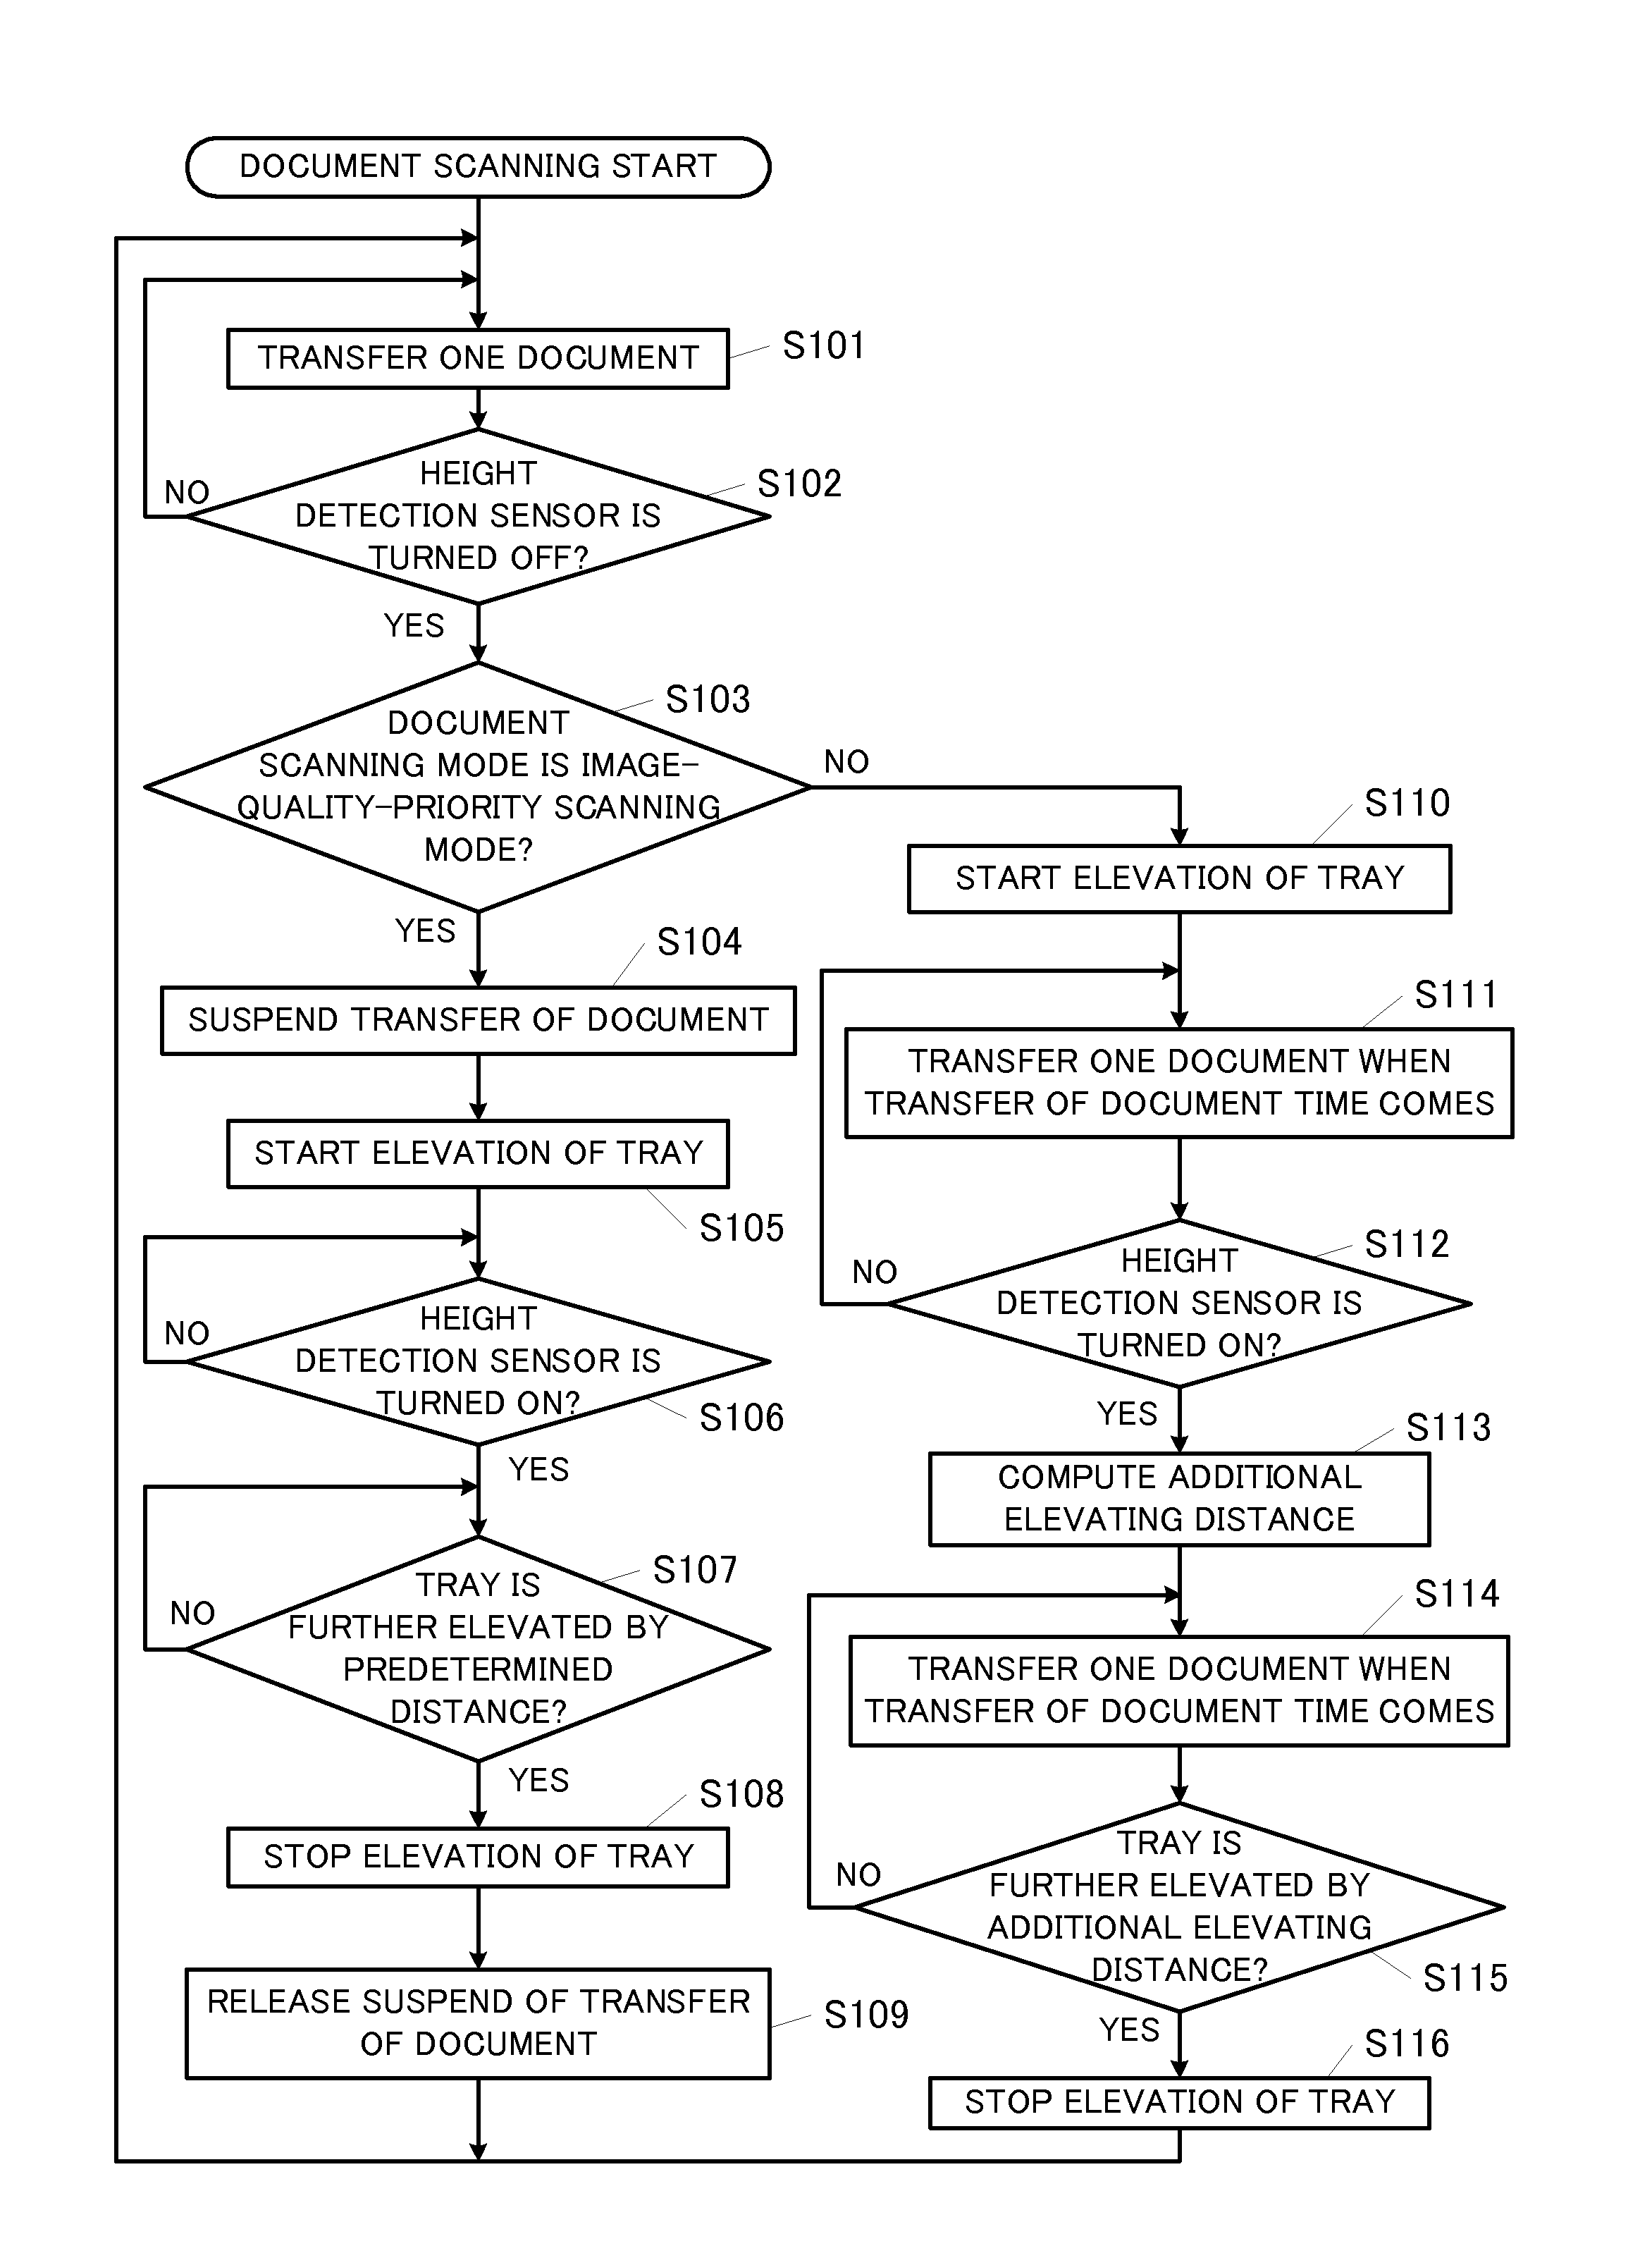 Image scanning apparatus and image scanner